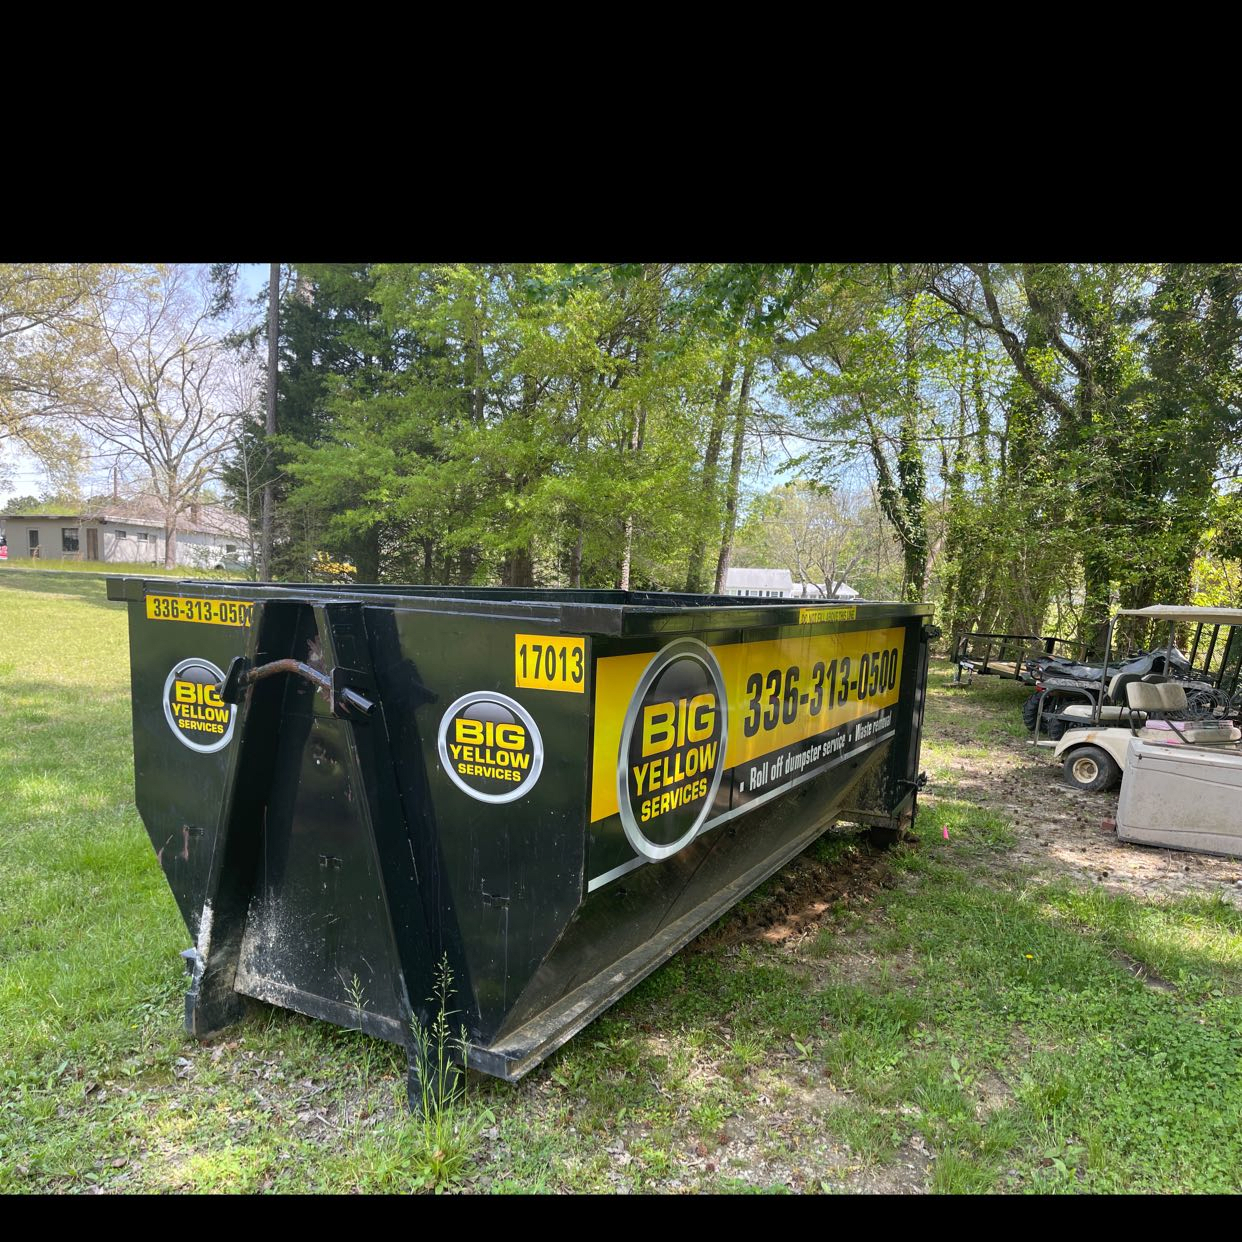 1820 Gerringer Road Elon, NC 27244 Dumpster Rental Privacy Policy | Roll-Off Dumpster and Portable Toilet Rentals | Big Yellow Services, LLC